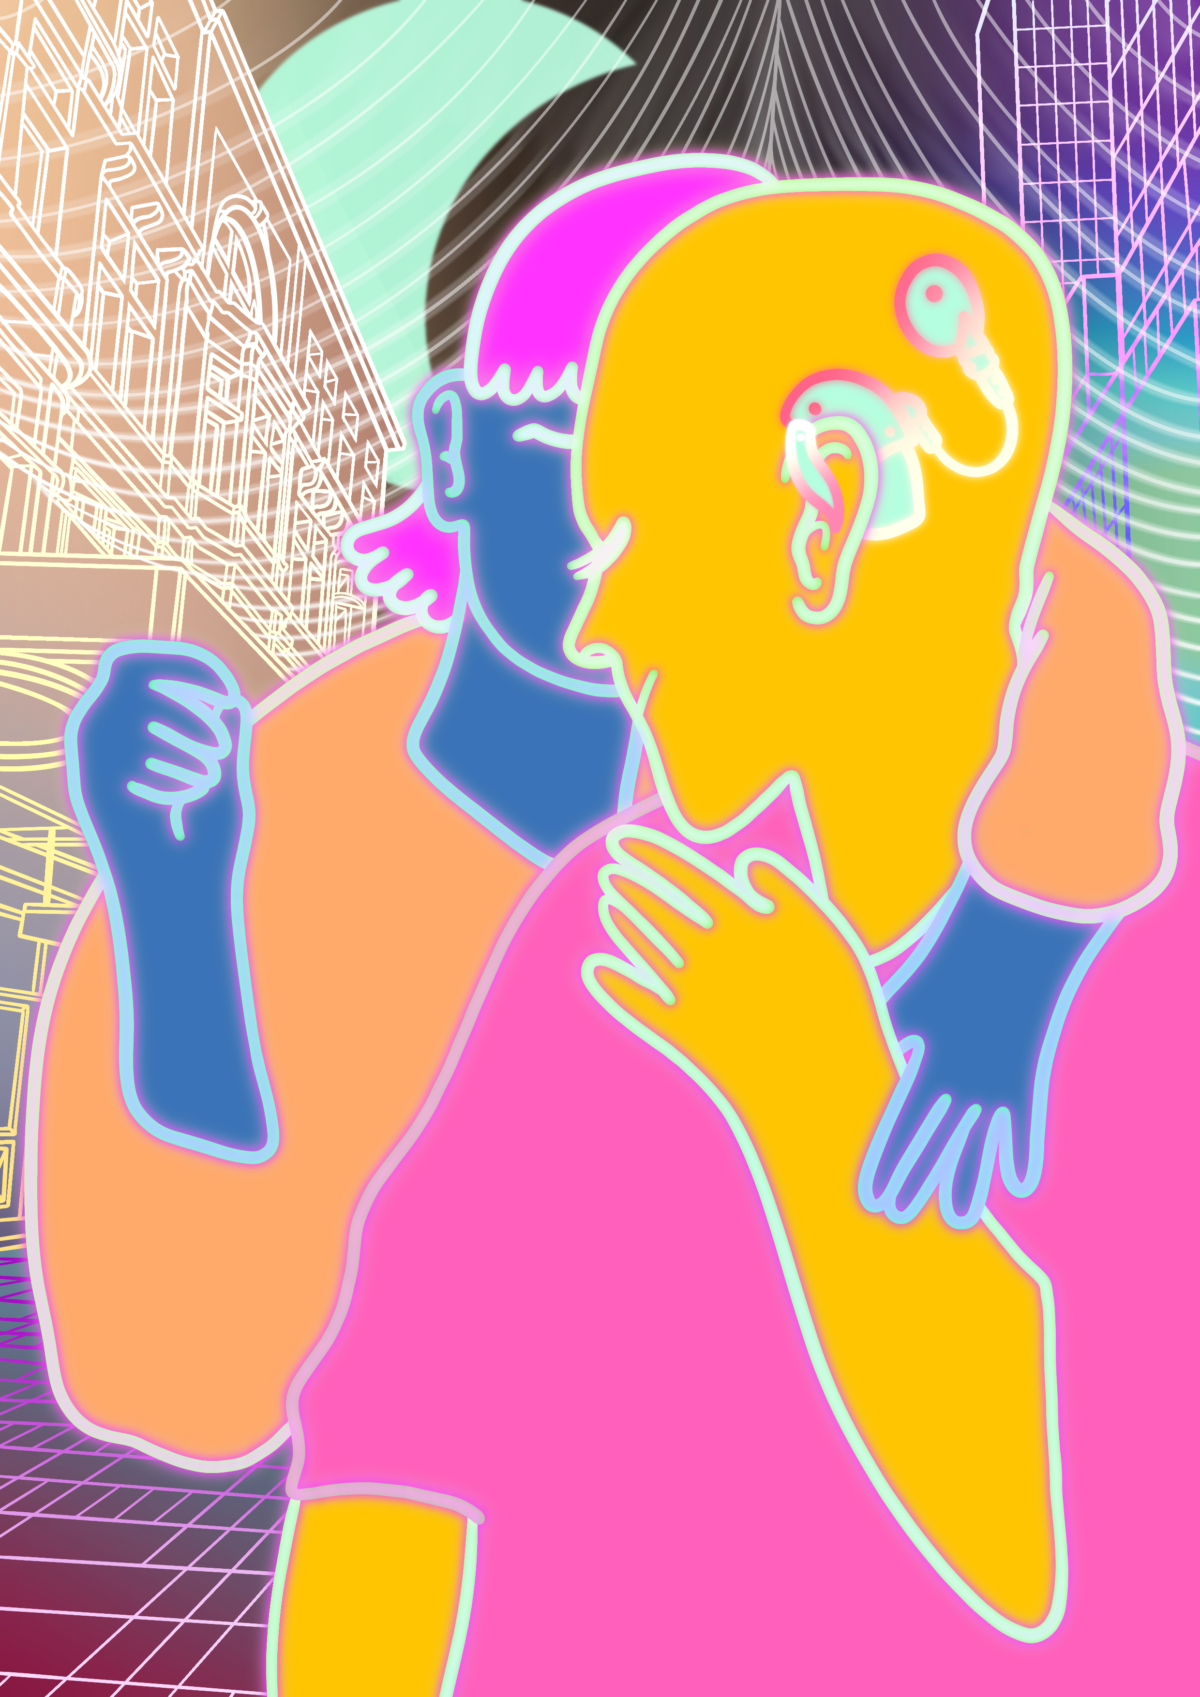 illustration in bright colours of a person embracing another from behind, the person in front has a hearing device